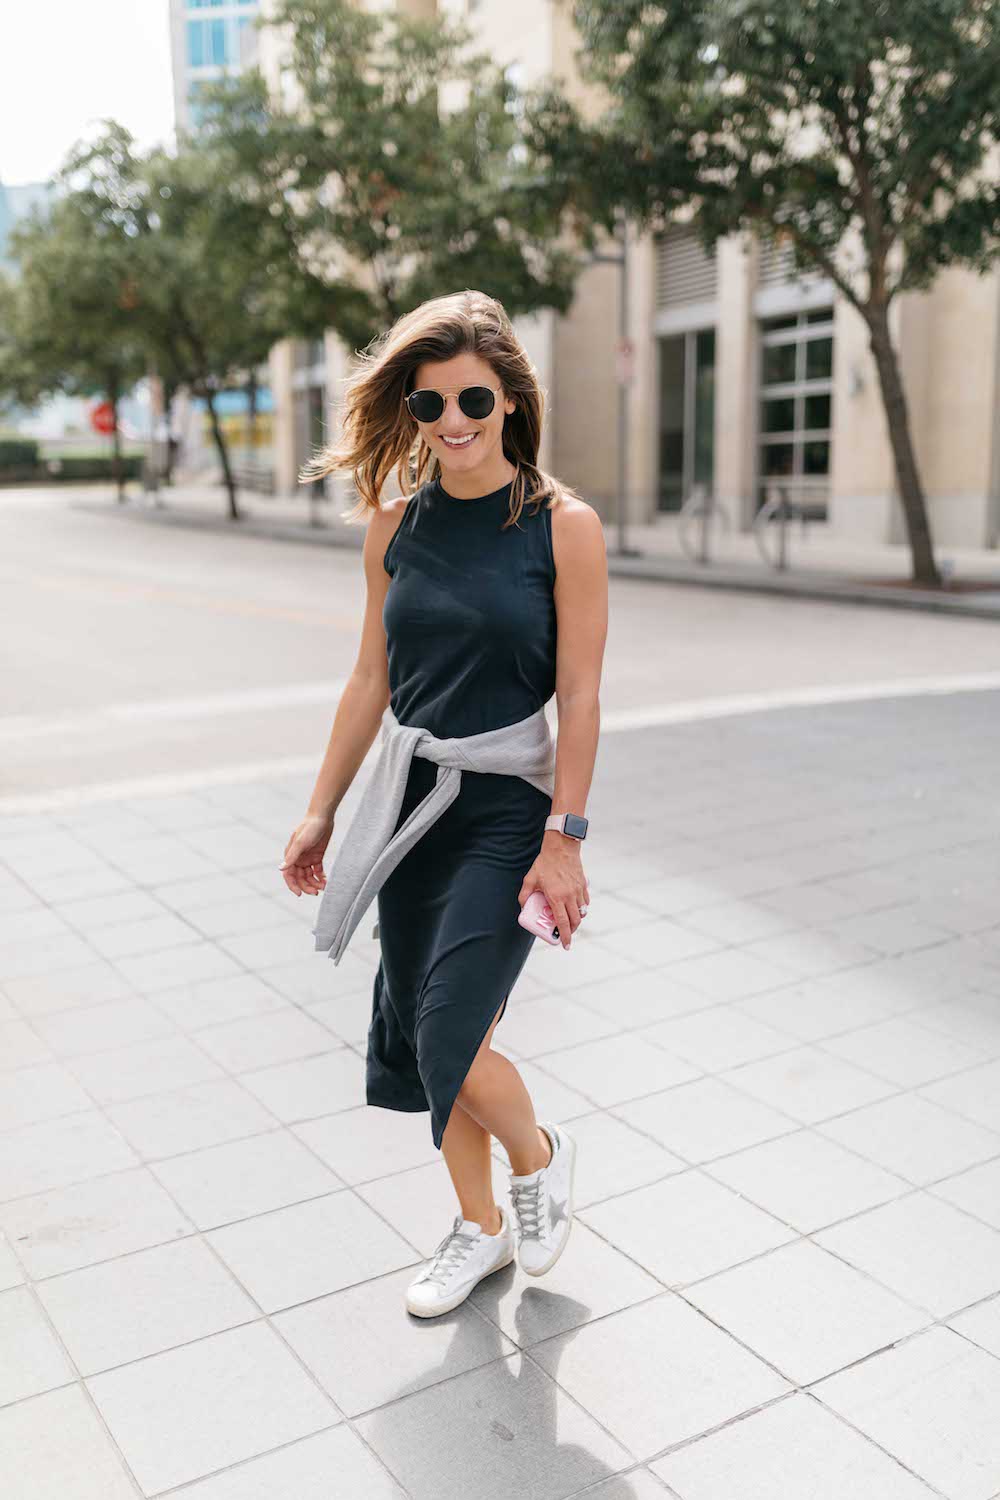 How to Wear a Midi Dress with Sneakers - the ultimate comfortable